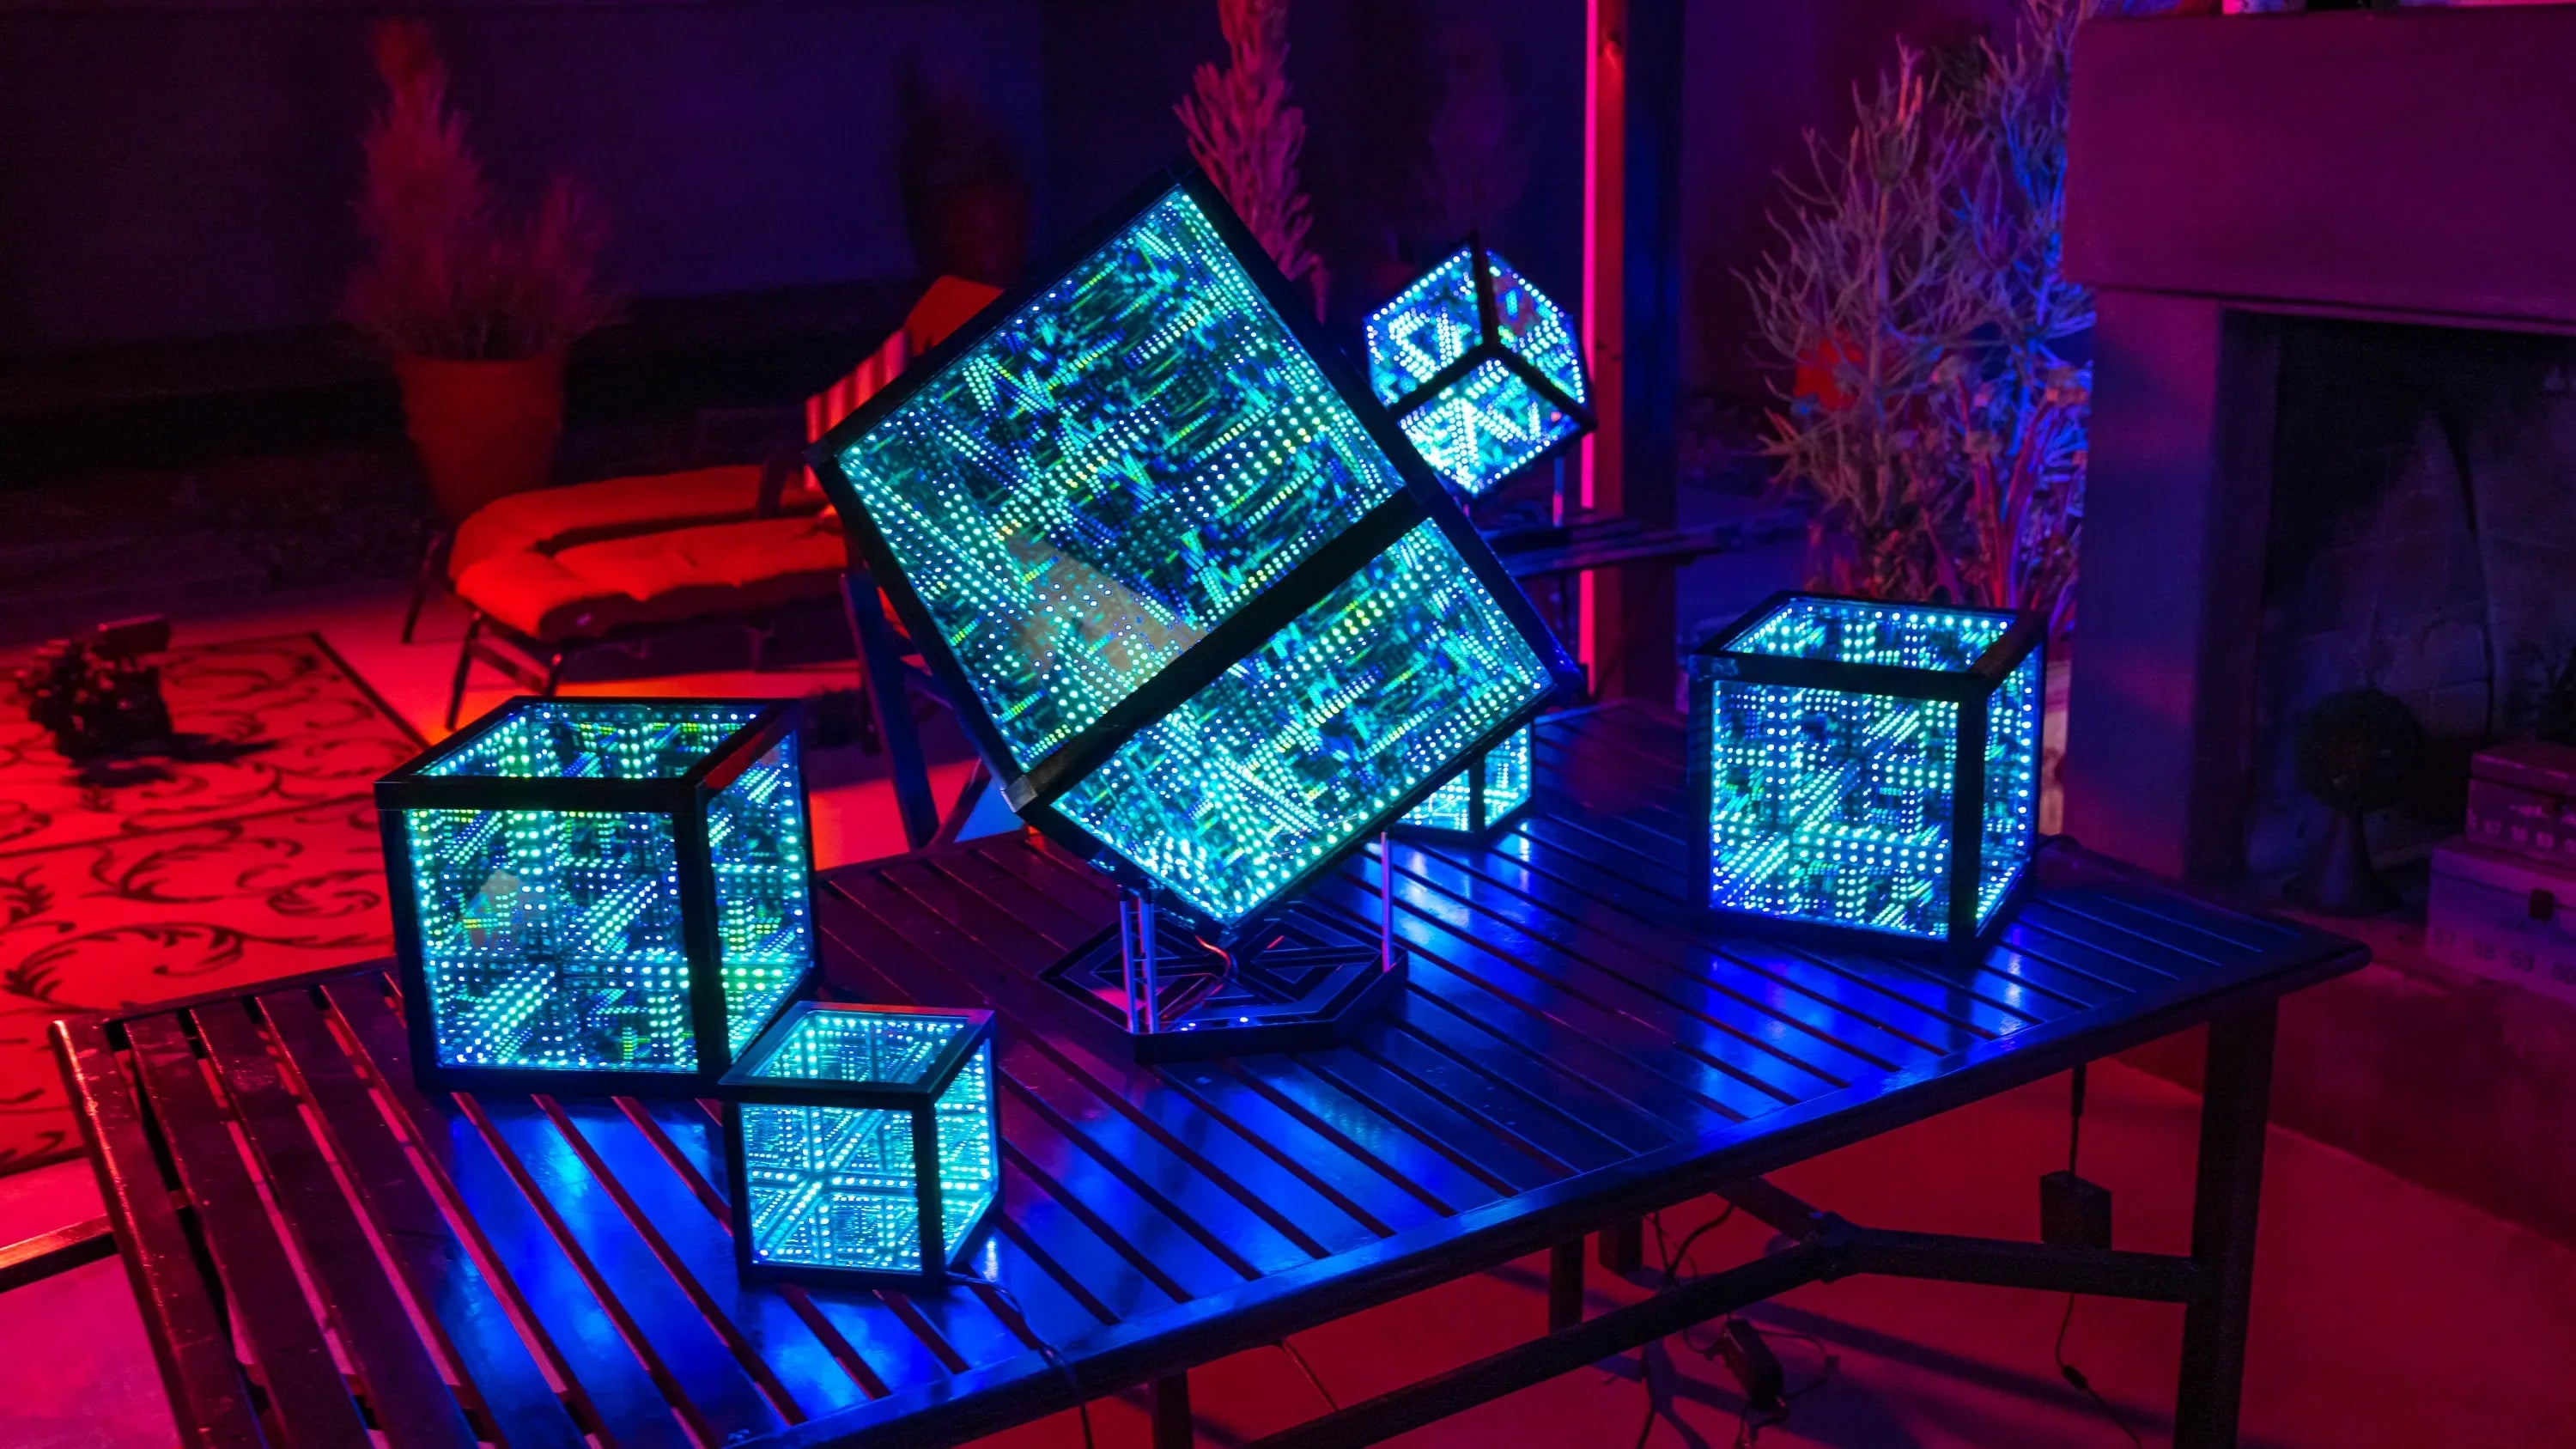 infinity mirror cubes on table